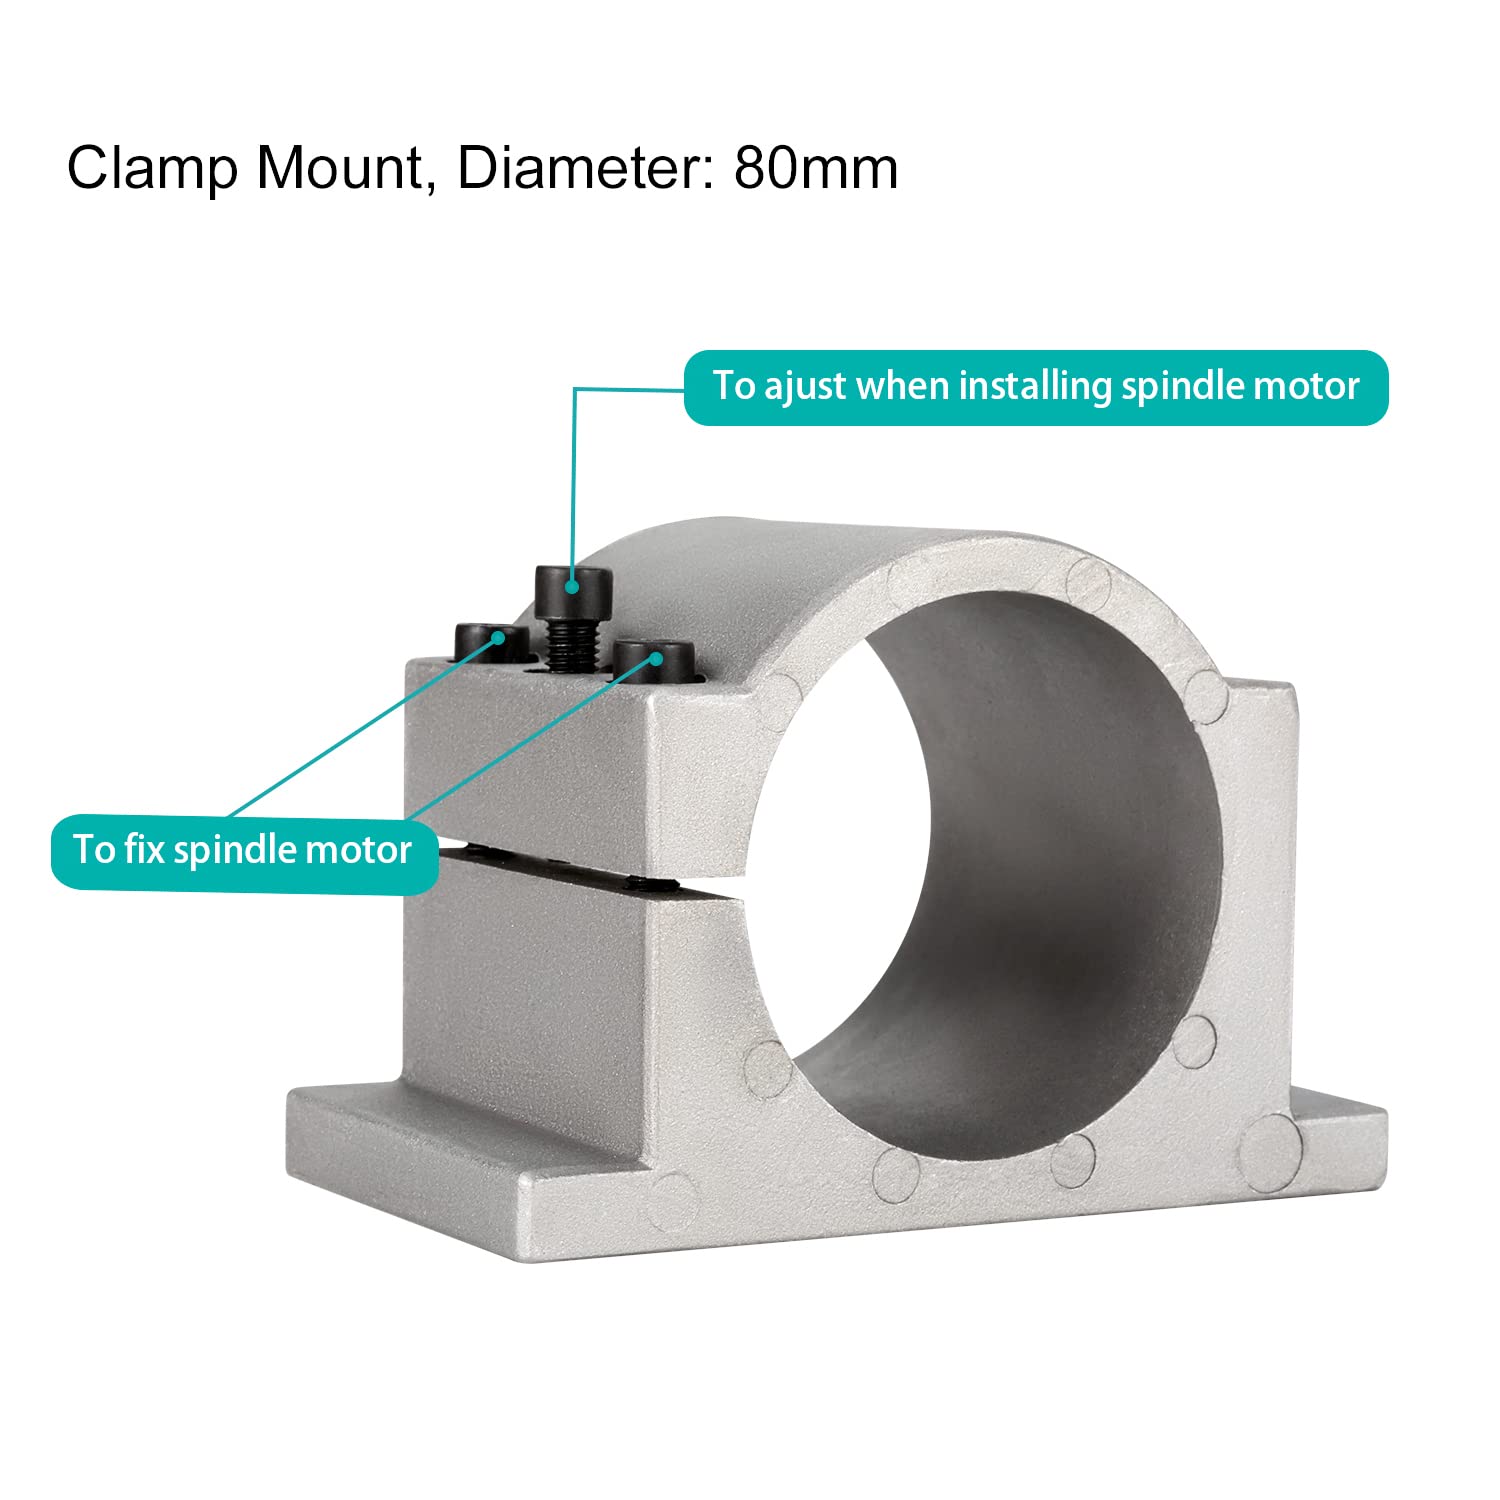 CNC Clamp Mount Bracket Support 80mm Cast Aluminium with 3pcs Screws for CNC Spindle Motor Water Cooled spindle Motor Air Cooled Spindle Motor 2.2KW or 1.5KW on CNC Router Machine